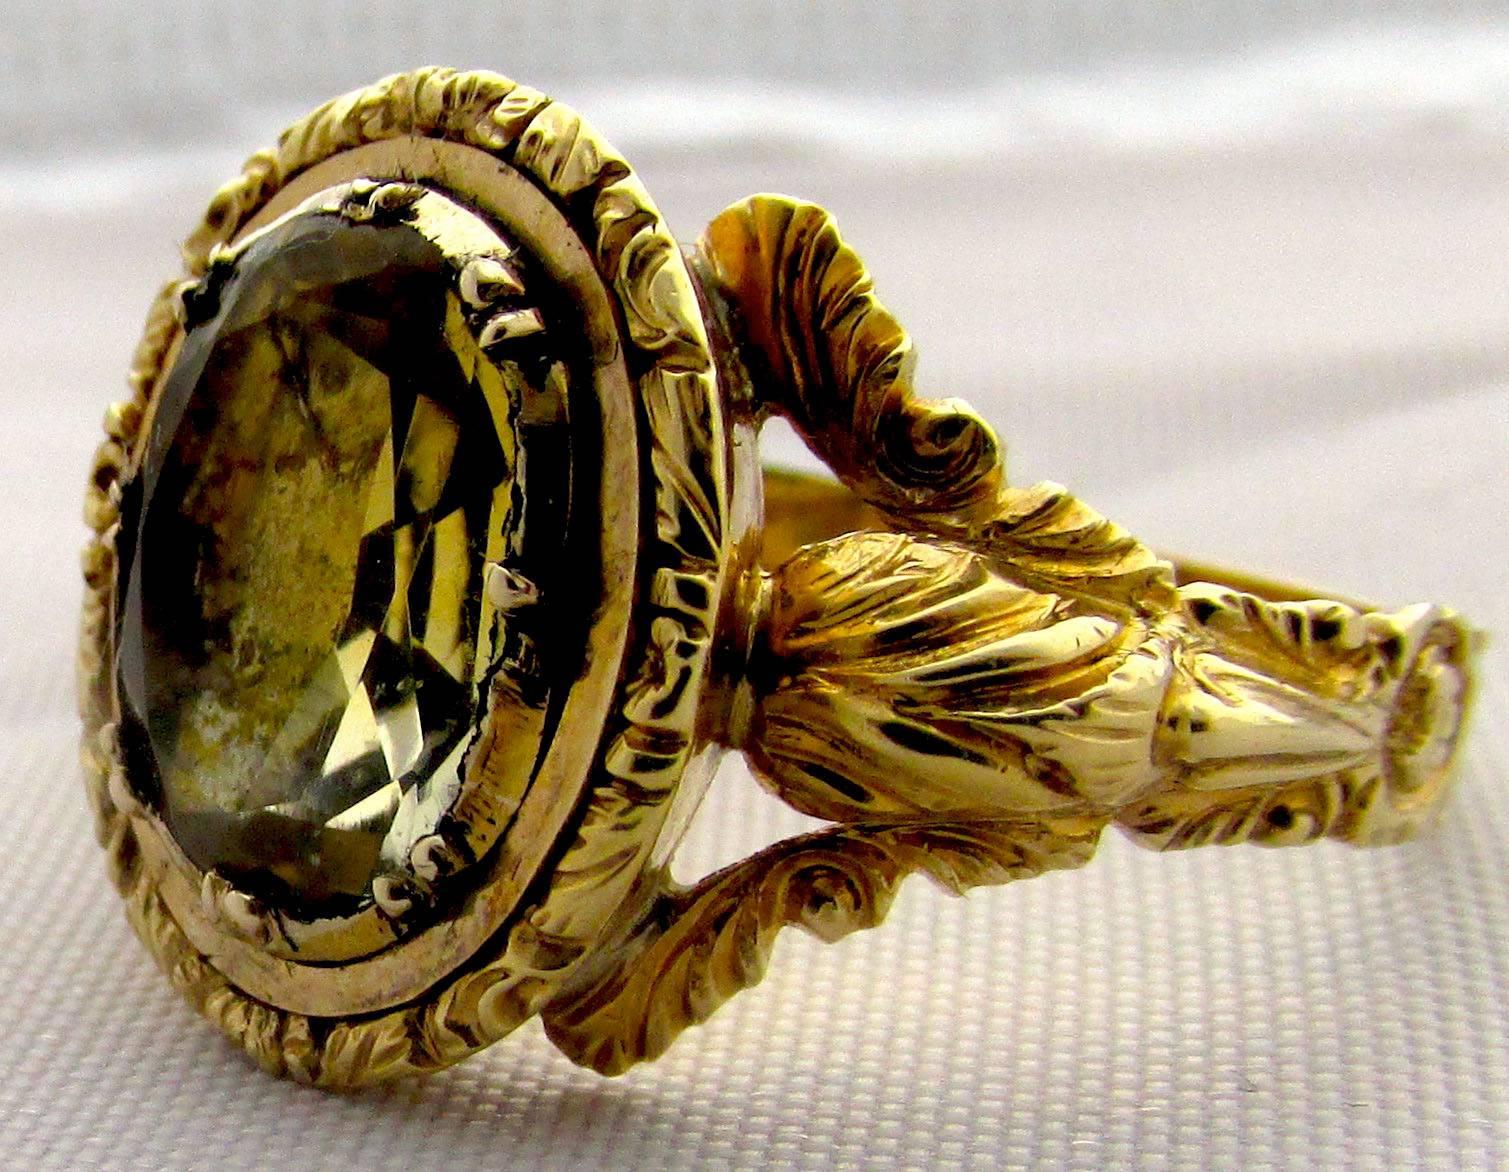 Bold Georgian 15K gold and citrine ring with a leaf design engraved on the band. The back of the ring is engraved 